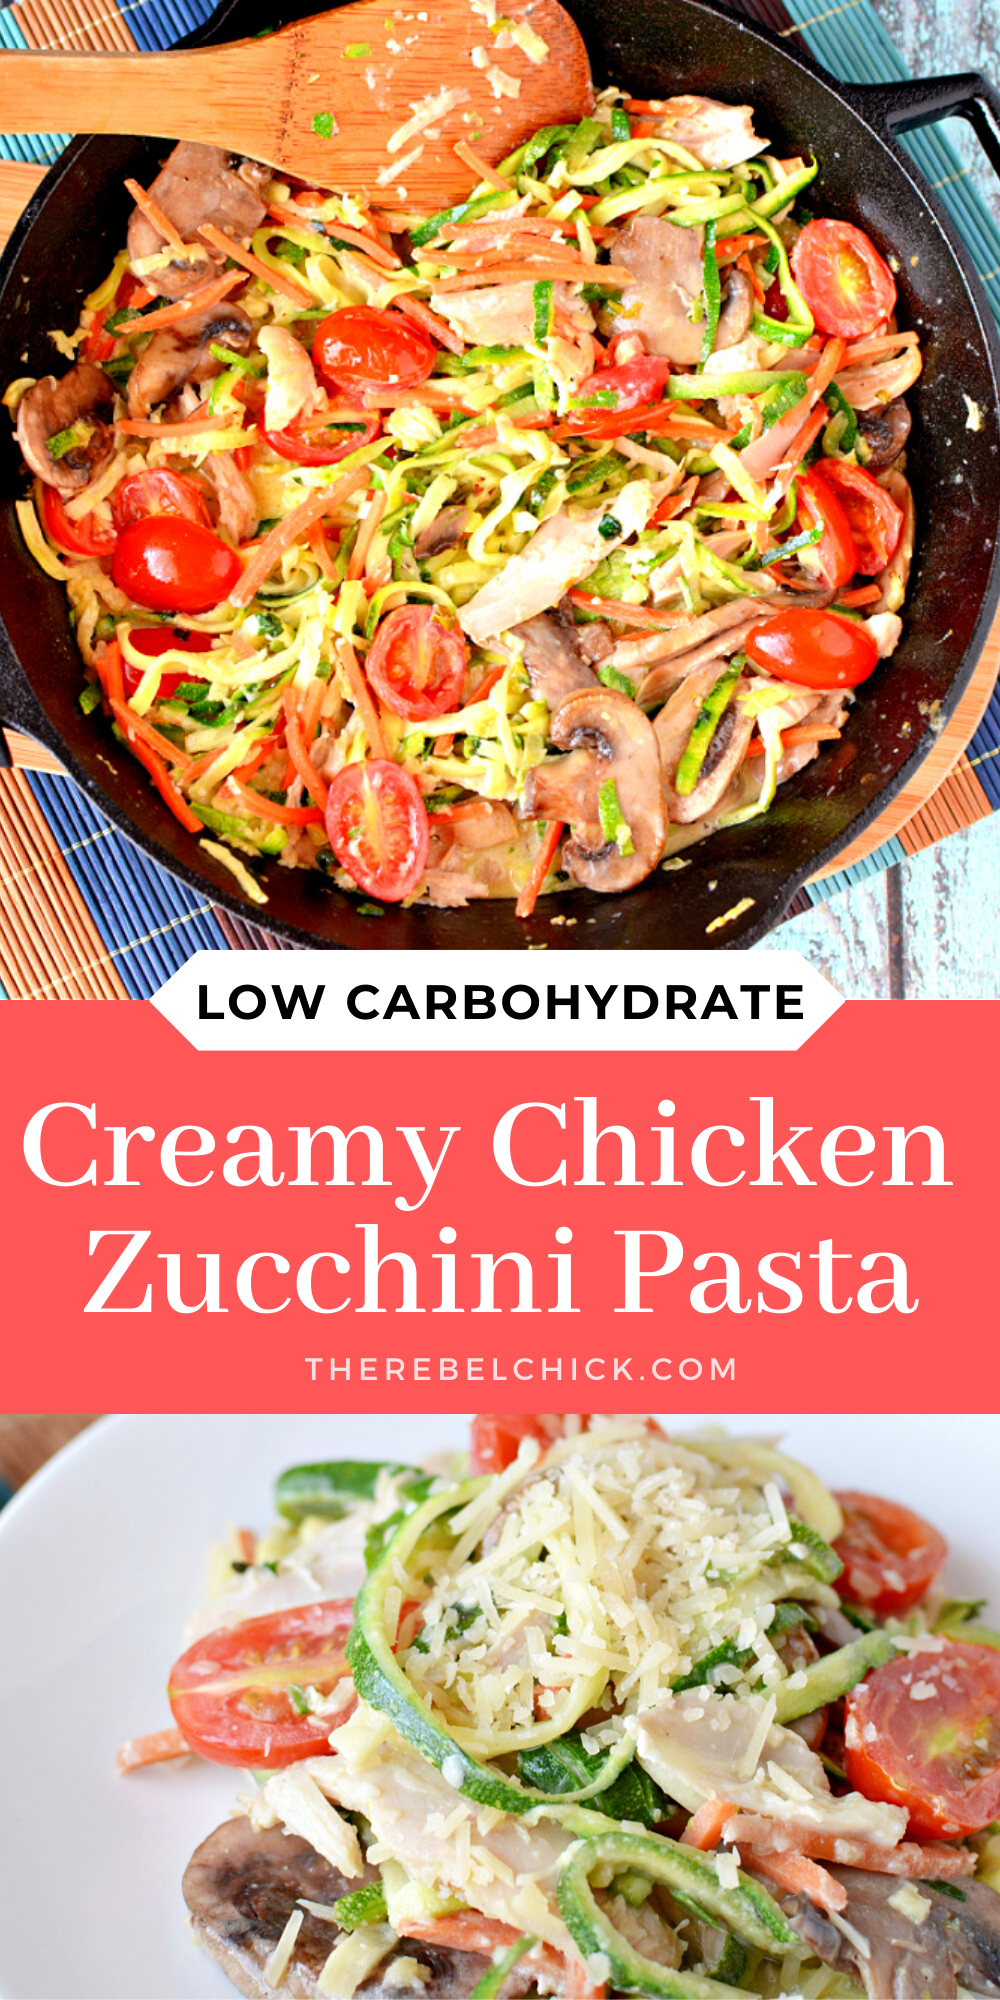 Easy Low Carb Zucchini Pasta Dinner